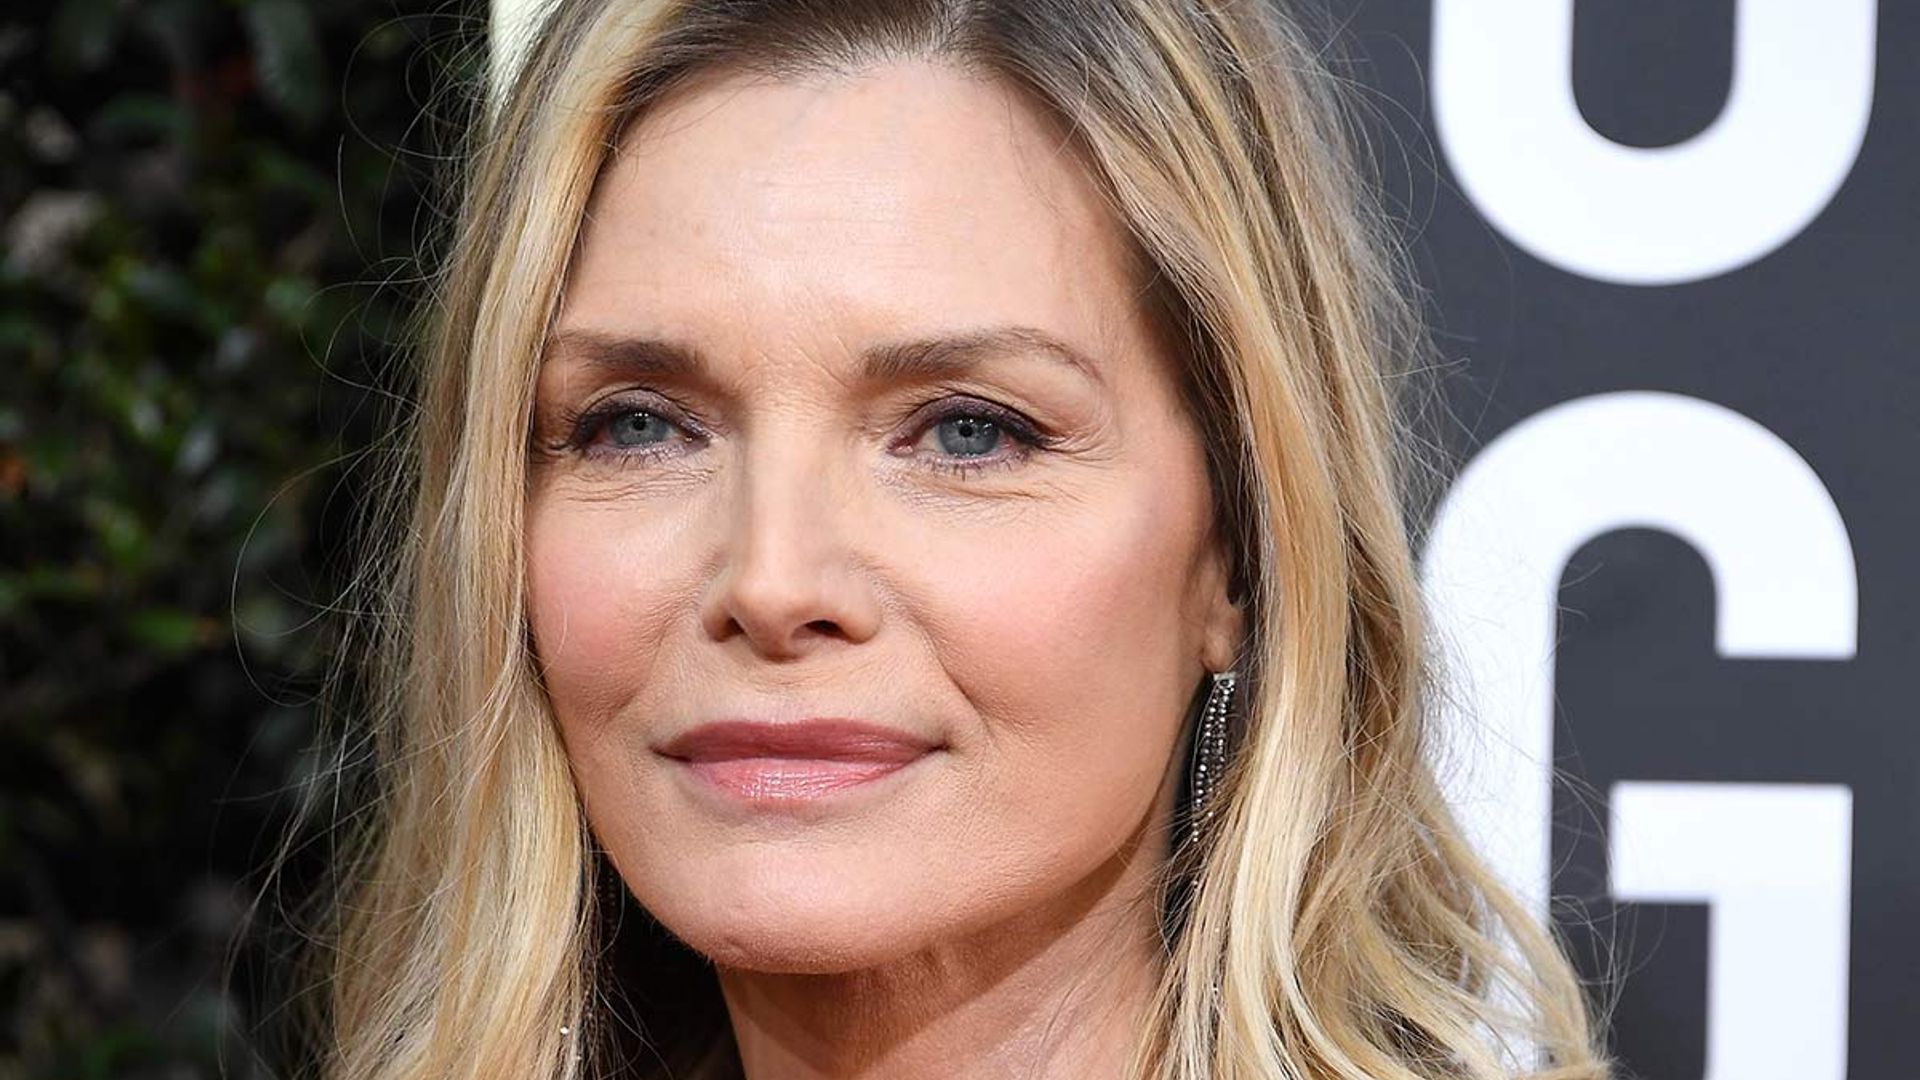 Michelle Pfeiffer turns heads in royal approved figure-hugging mesh dress